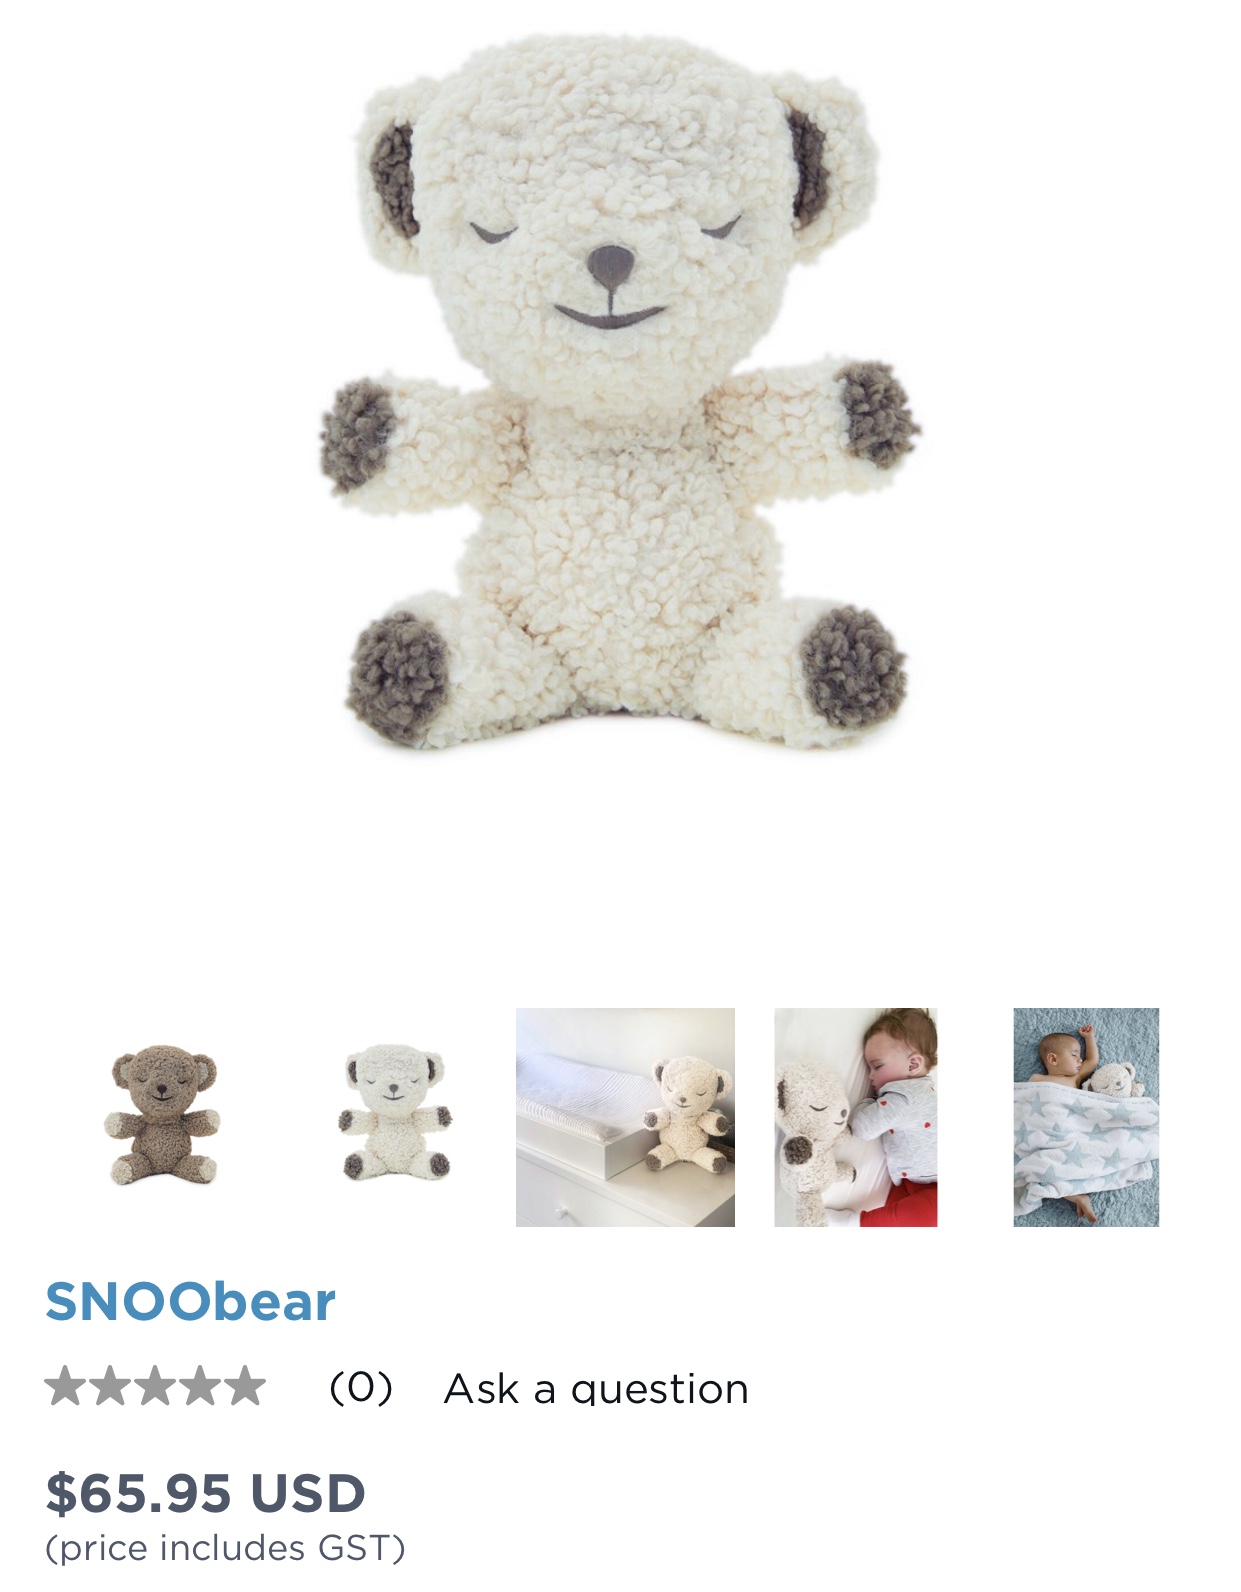 Happiest baby - snoo bear in white